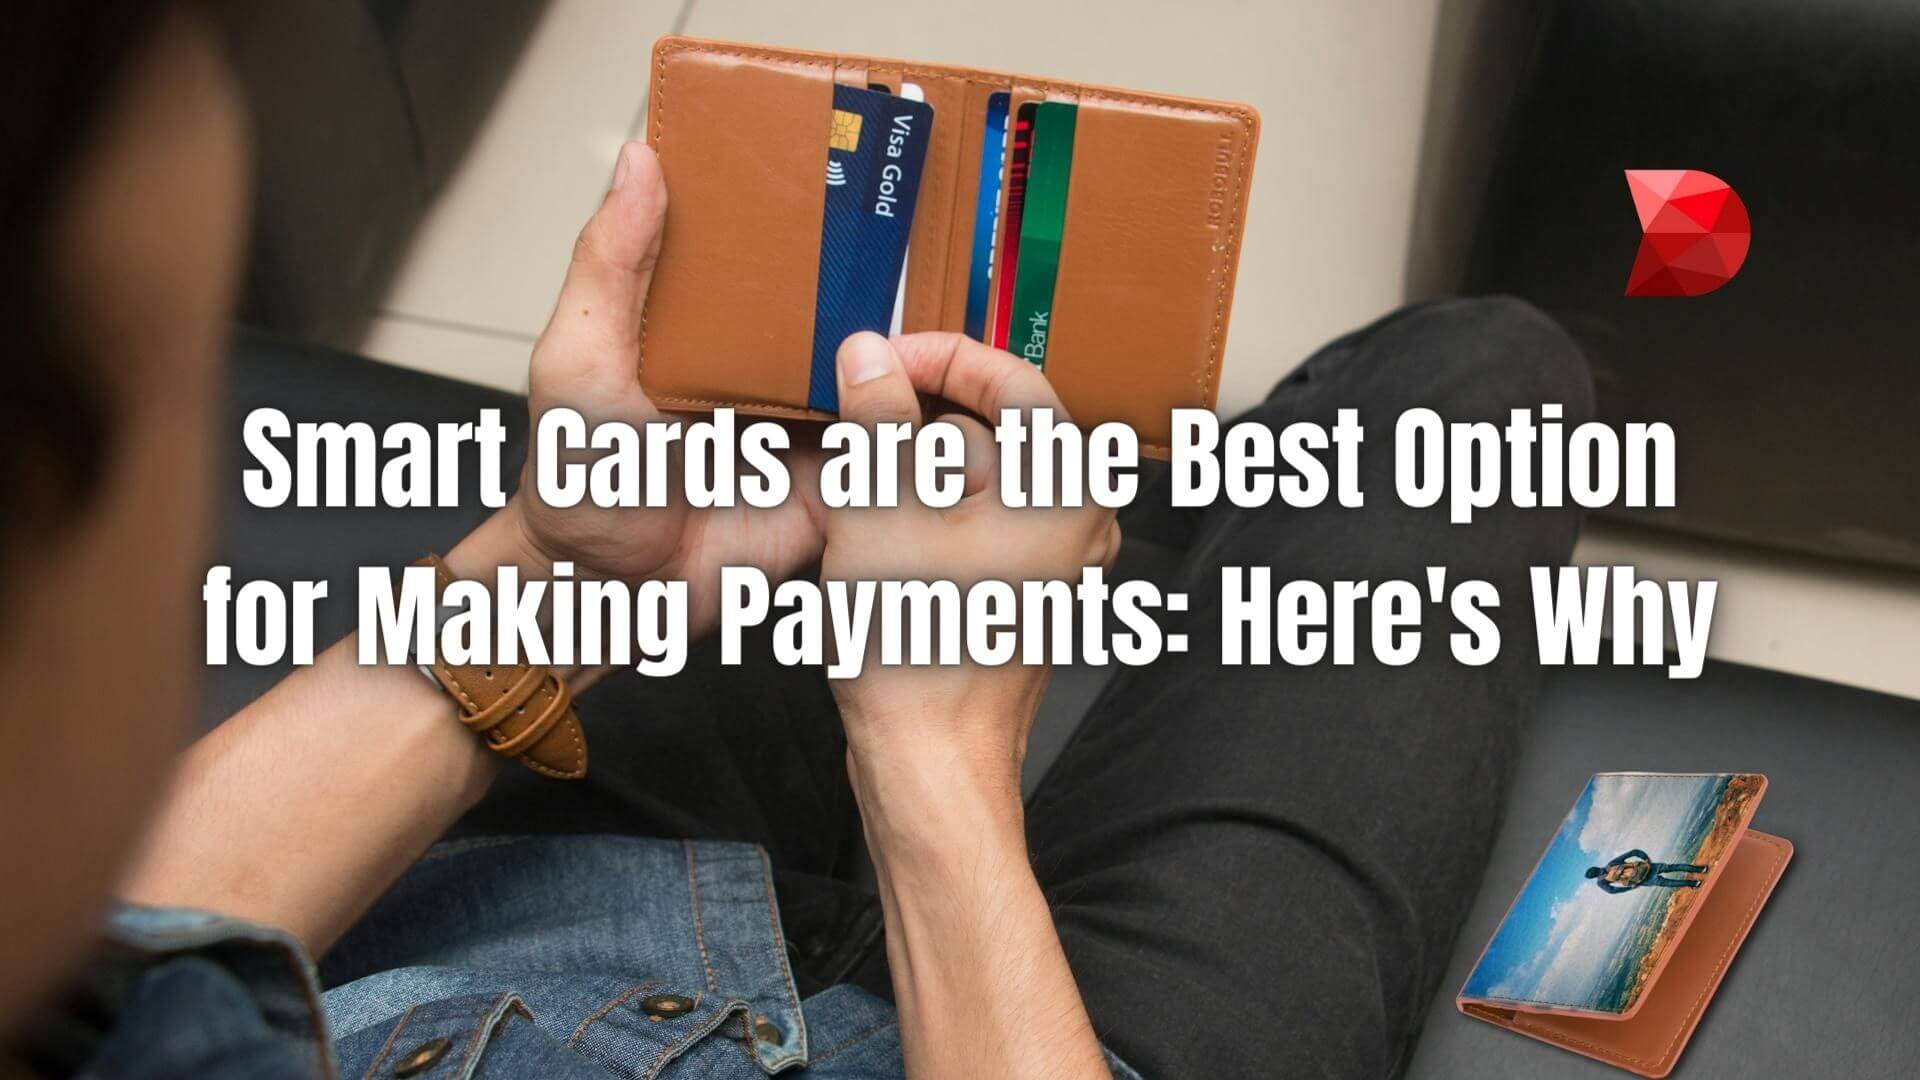 Discover why smart cards reign supreme for payments! Learn their benefits & why they're the top choice for secure transactions.